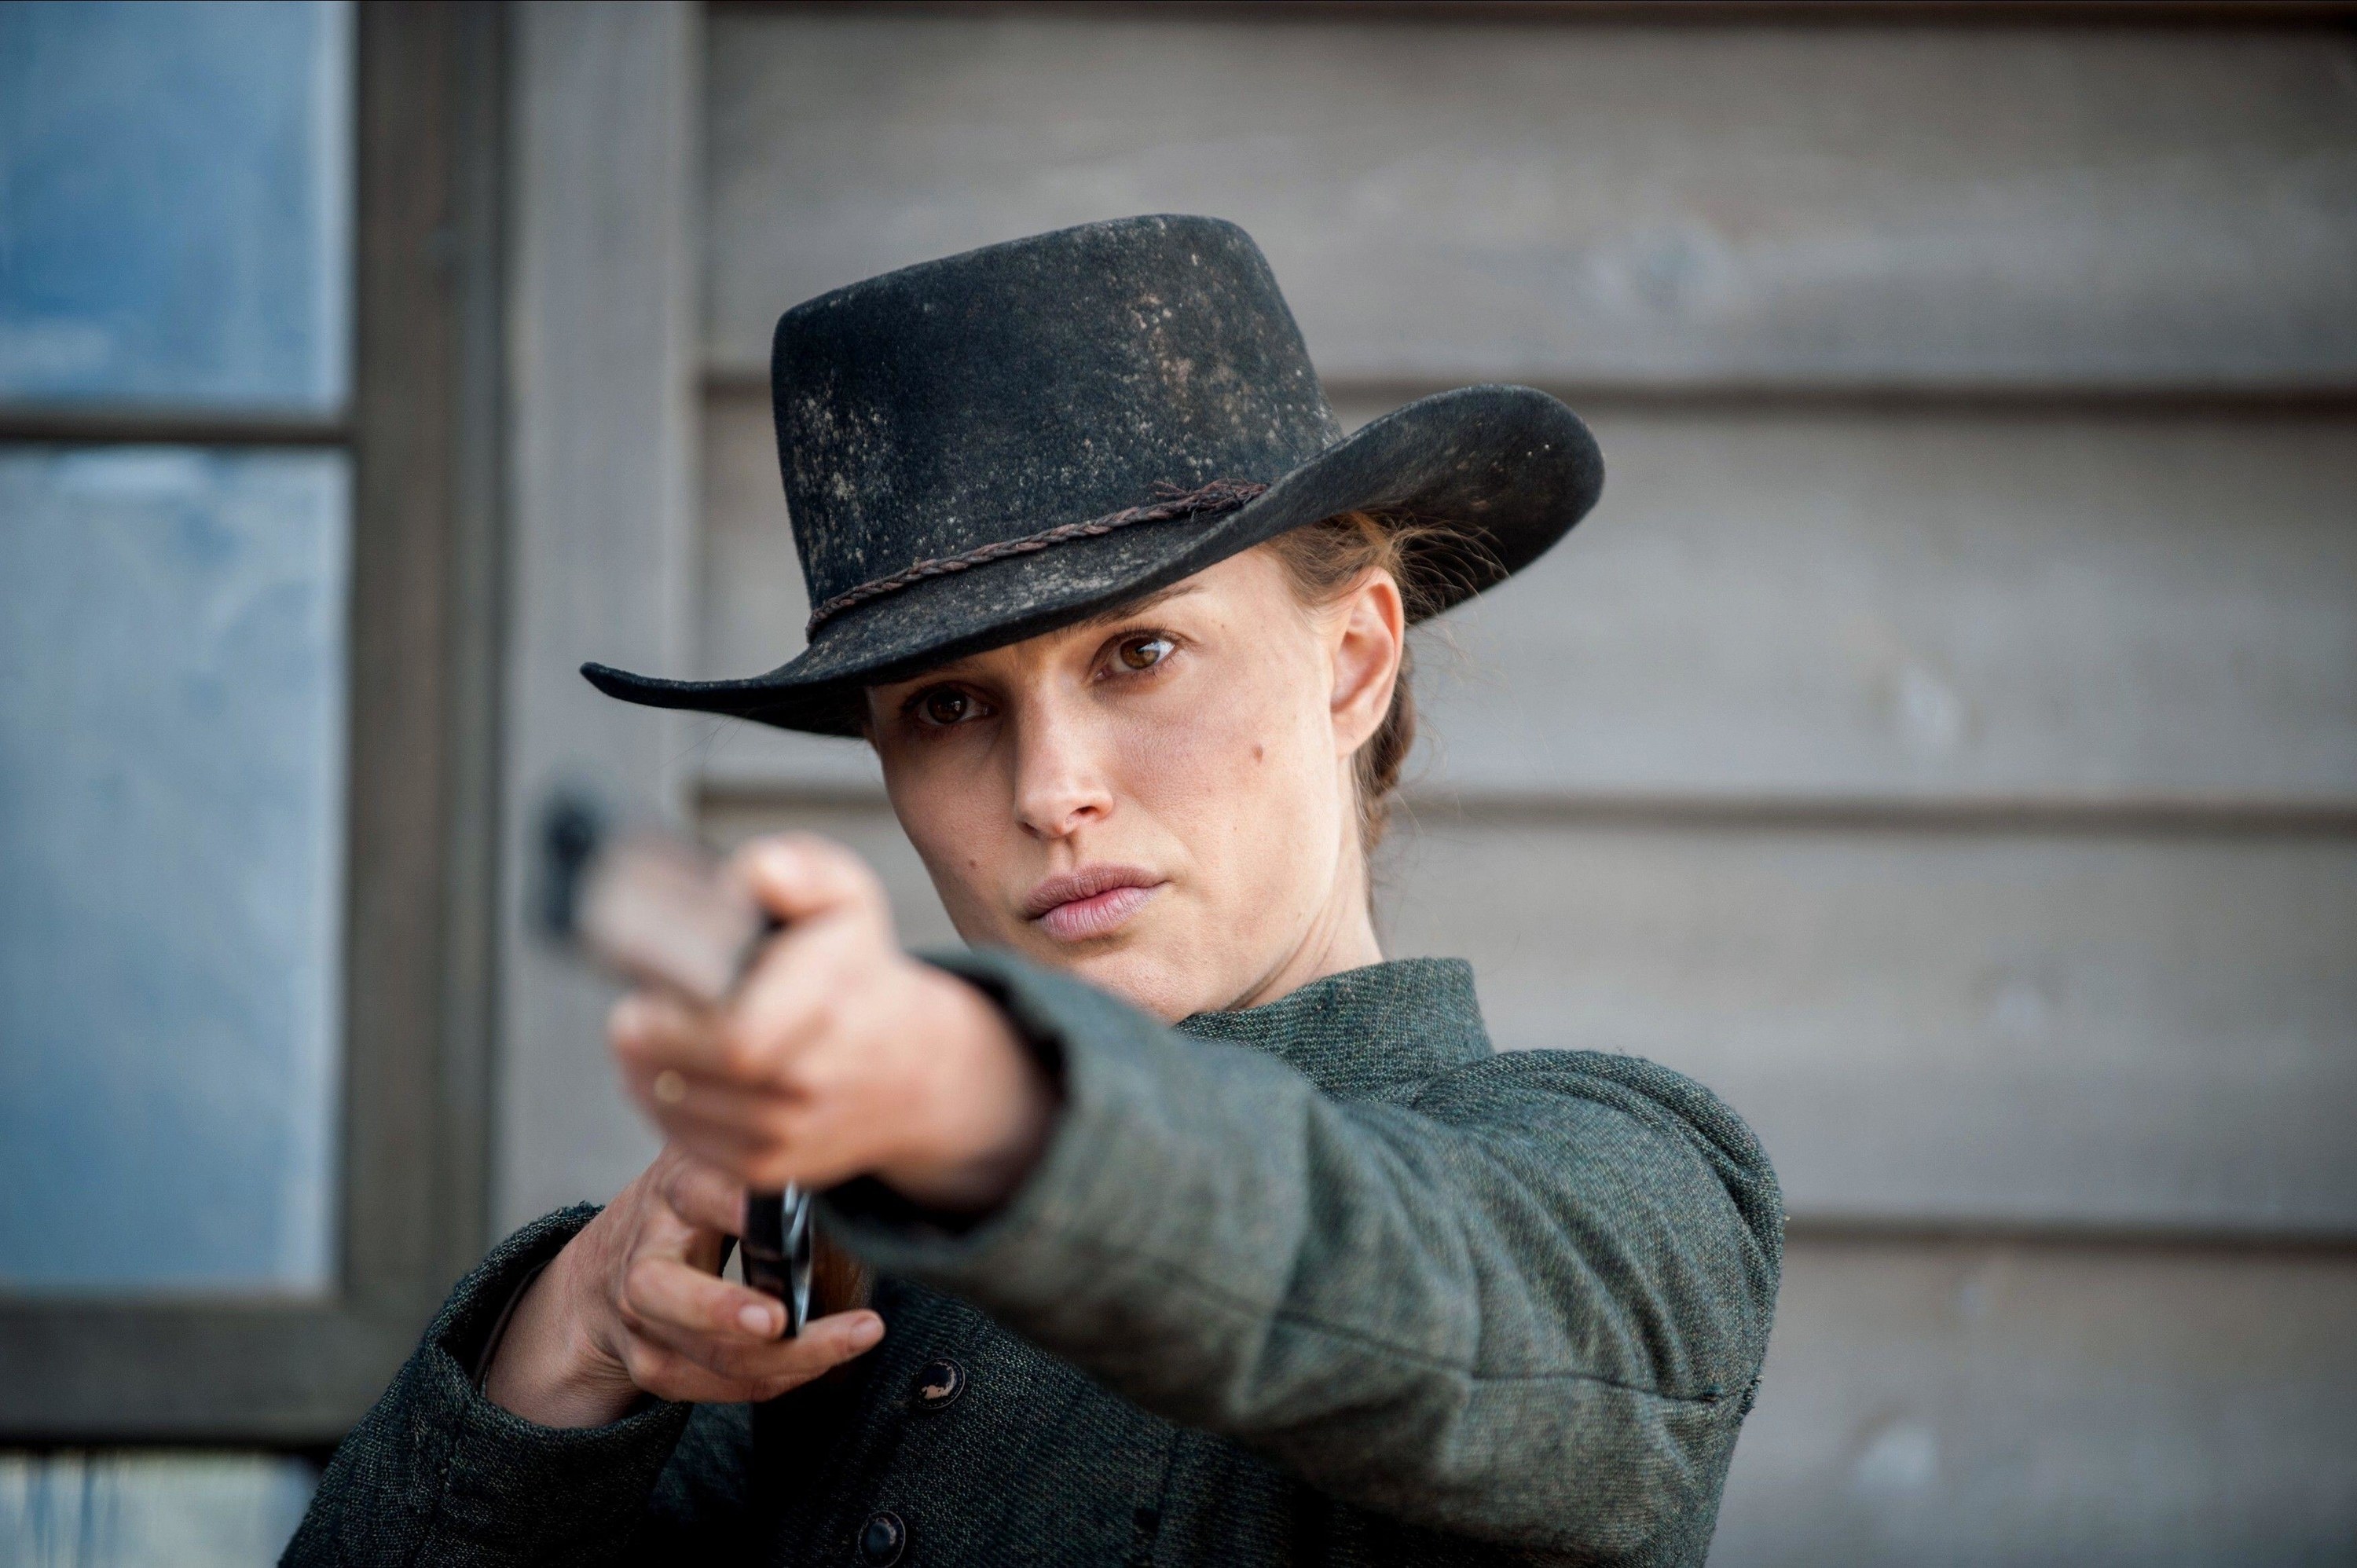 Natalie Portman points a rifle in a dusty western get-up